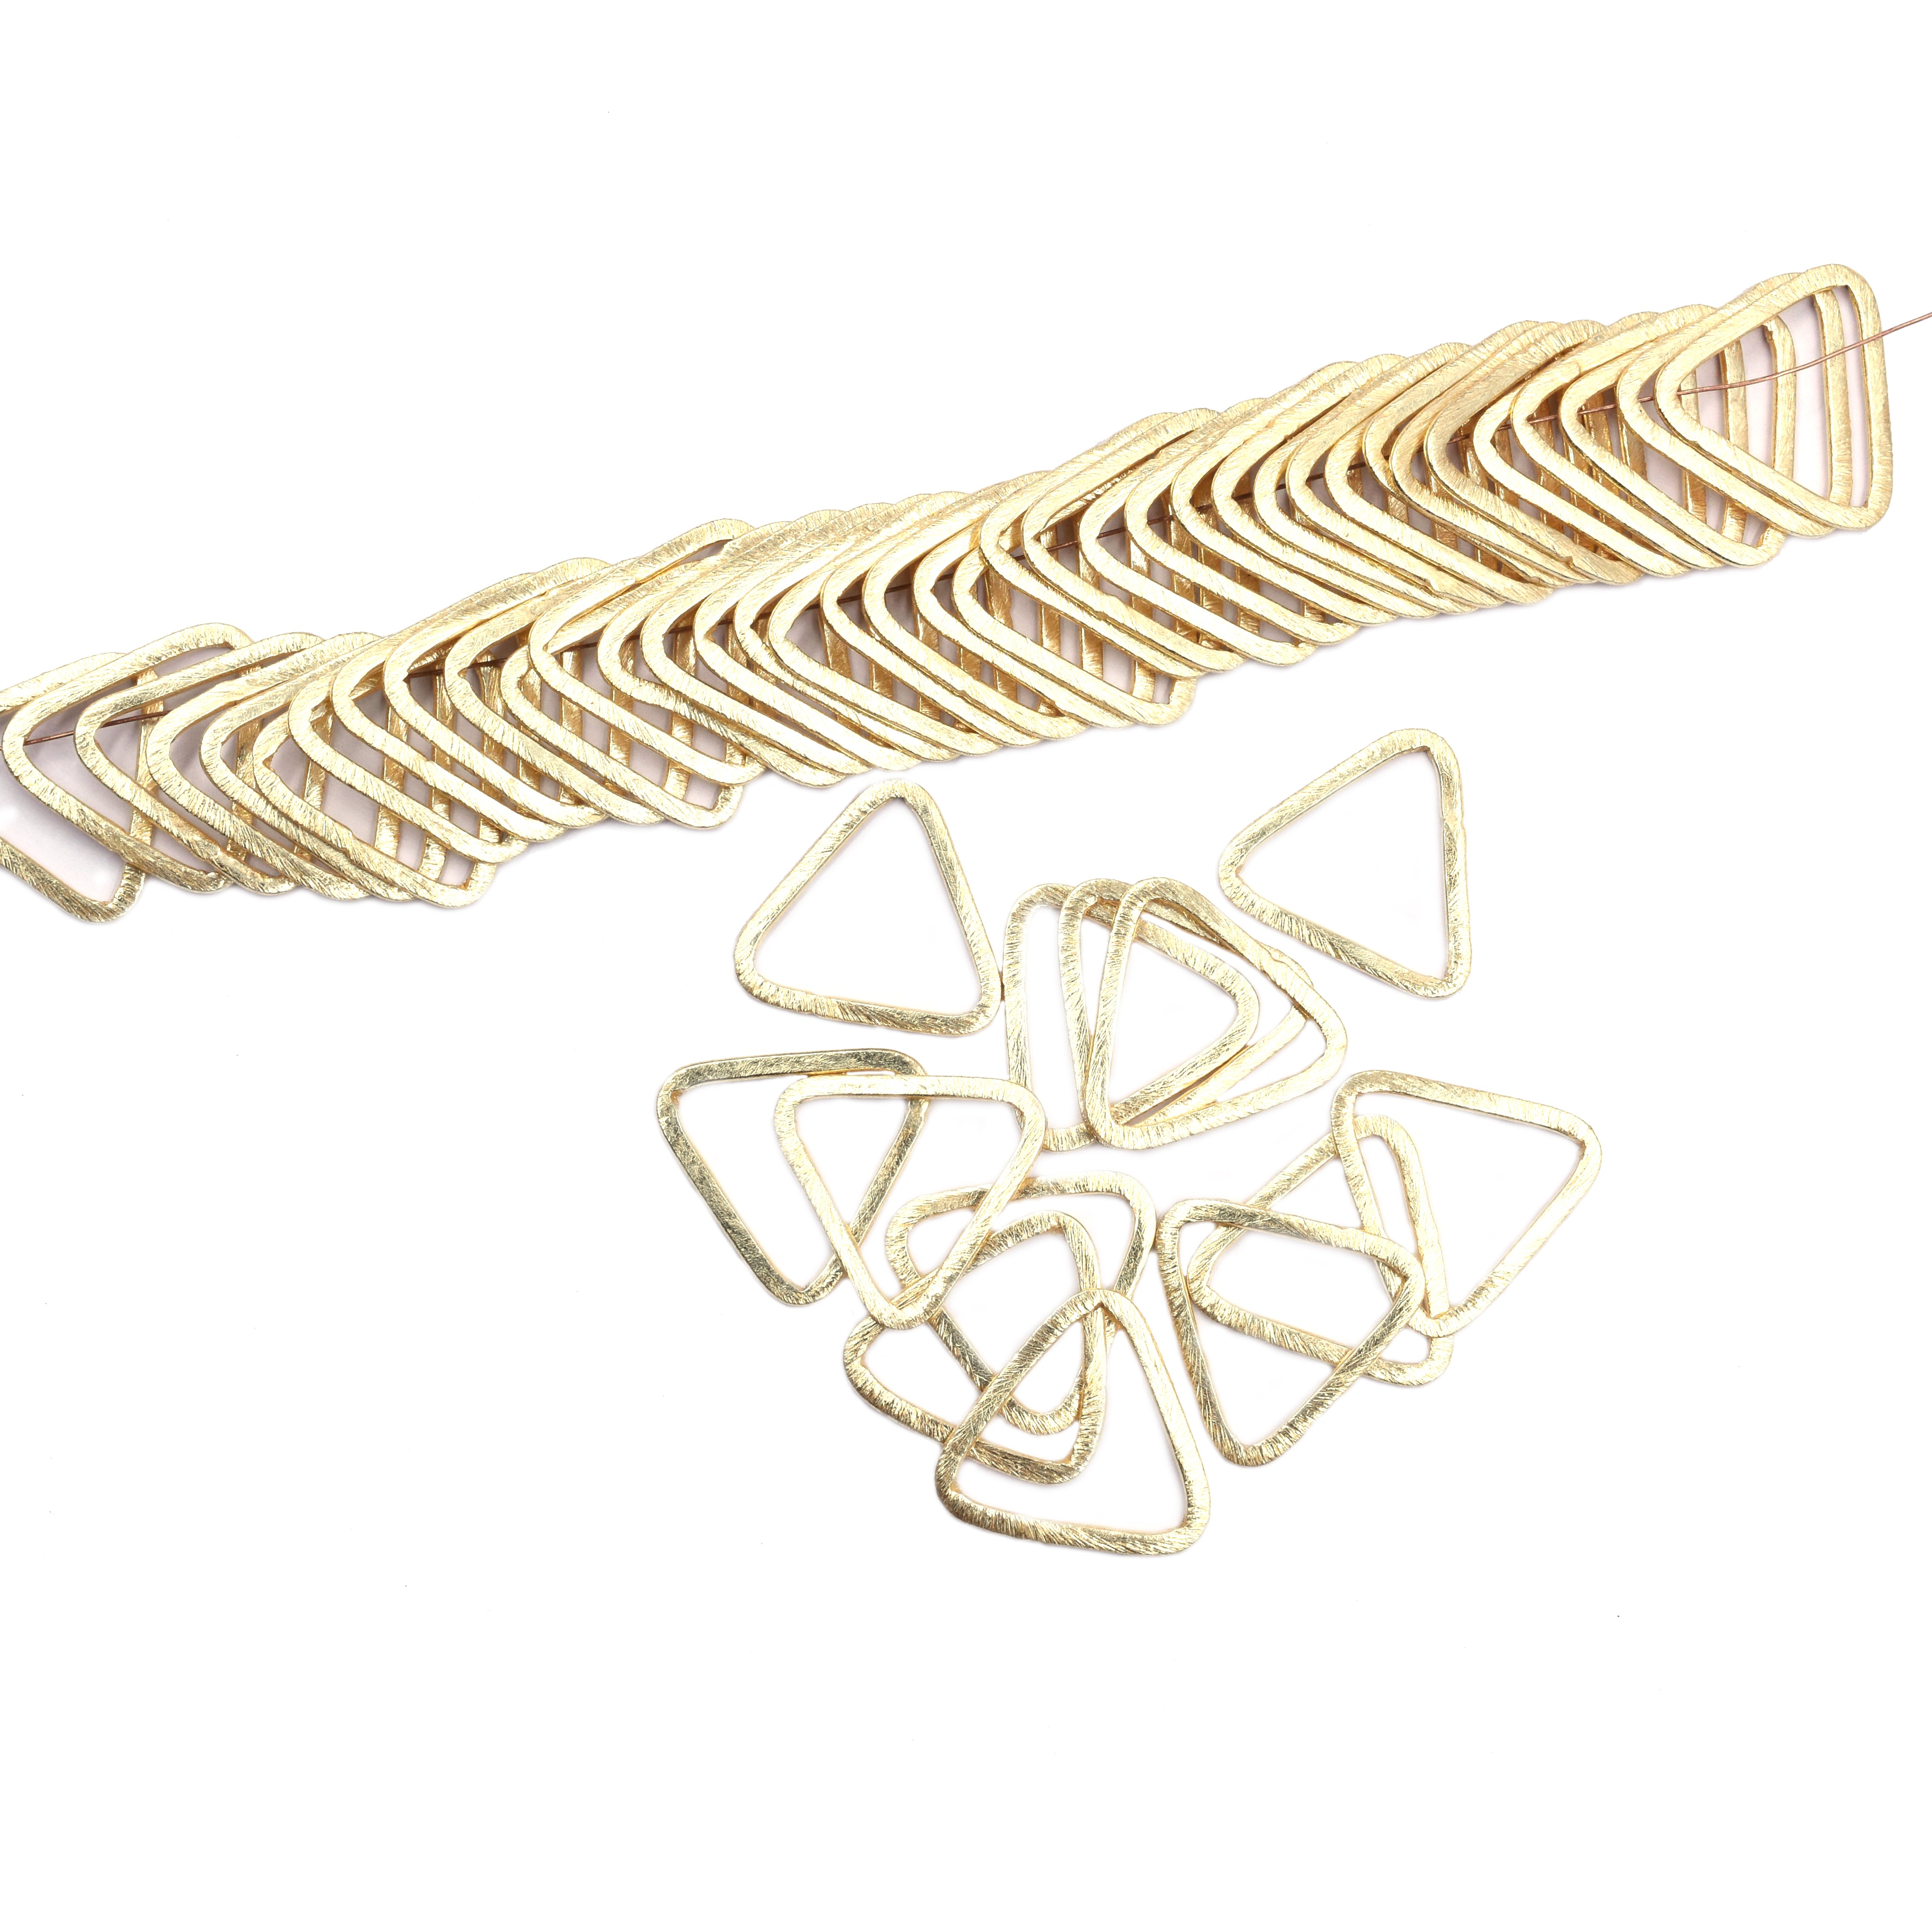 20 Pcs 24mm Triangle Brushed Matte Finish Links Hoops Connector Gold Plated Copper